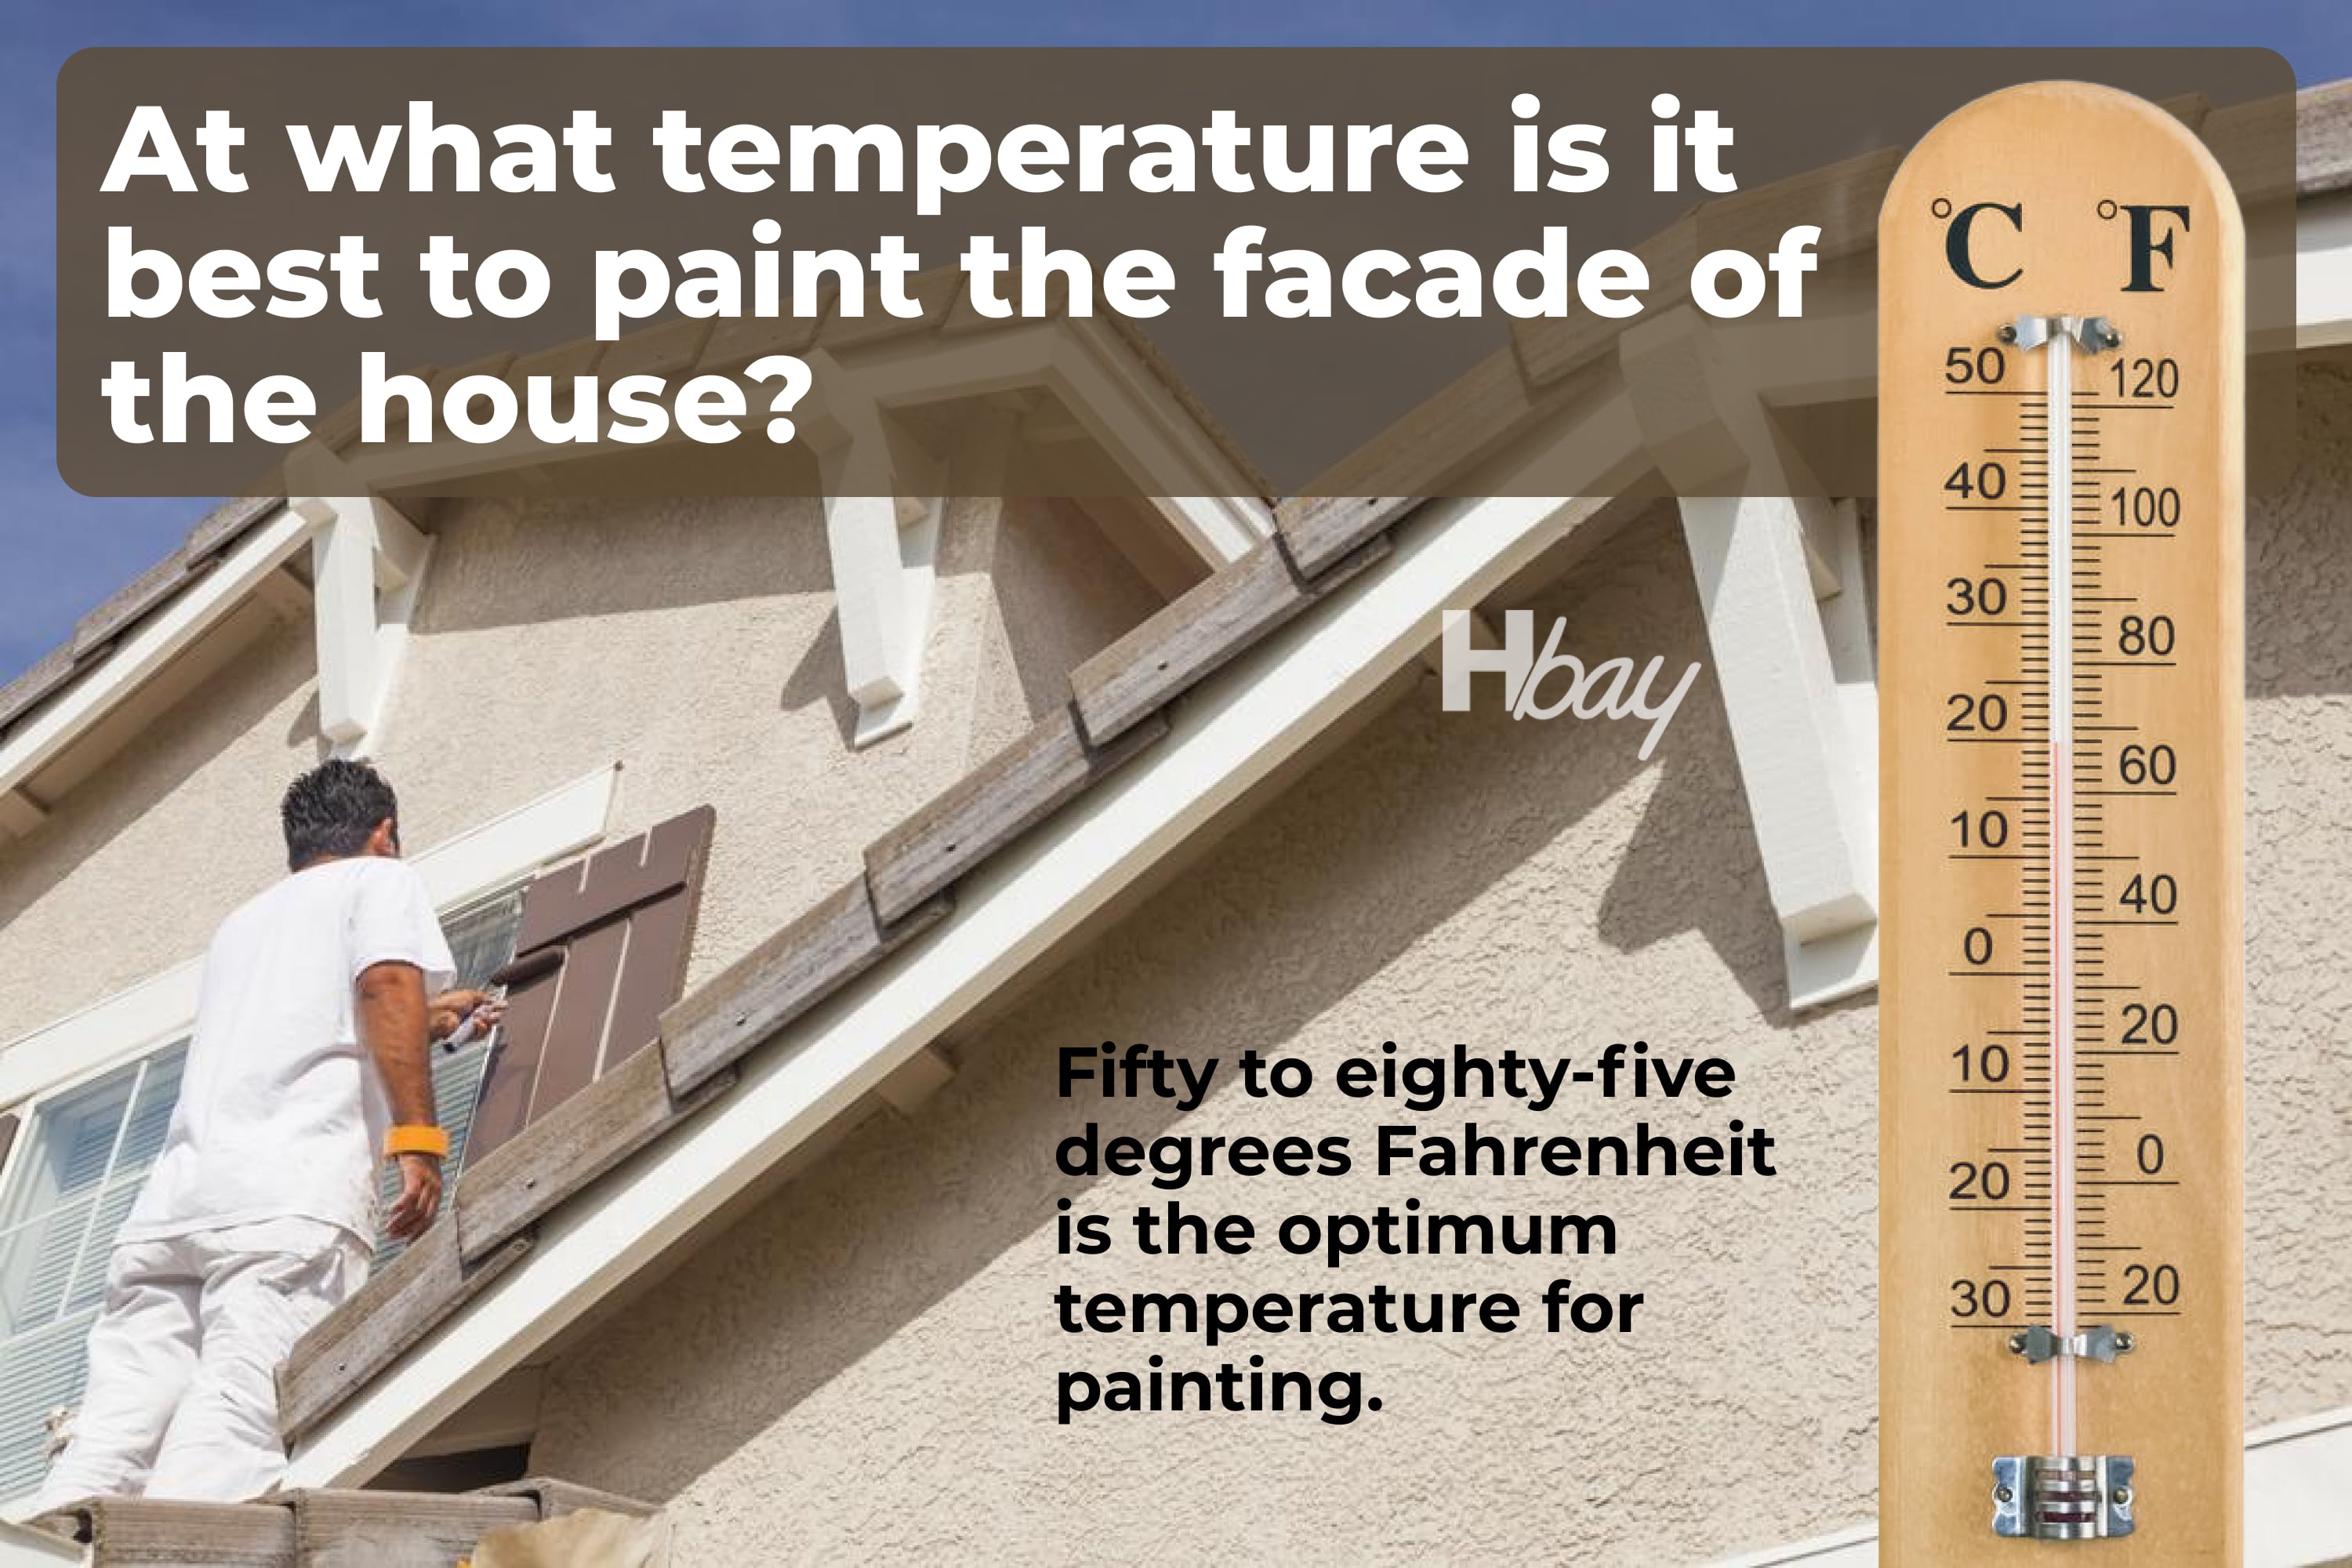 At what temperature is it best to paint the facade of the house